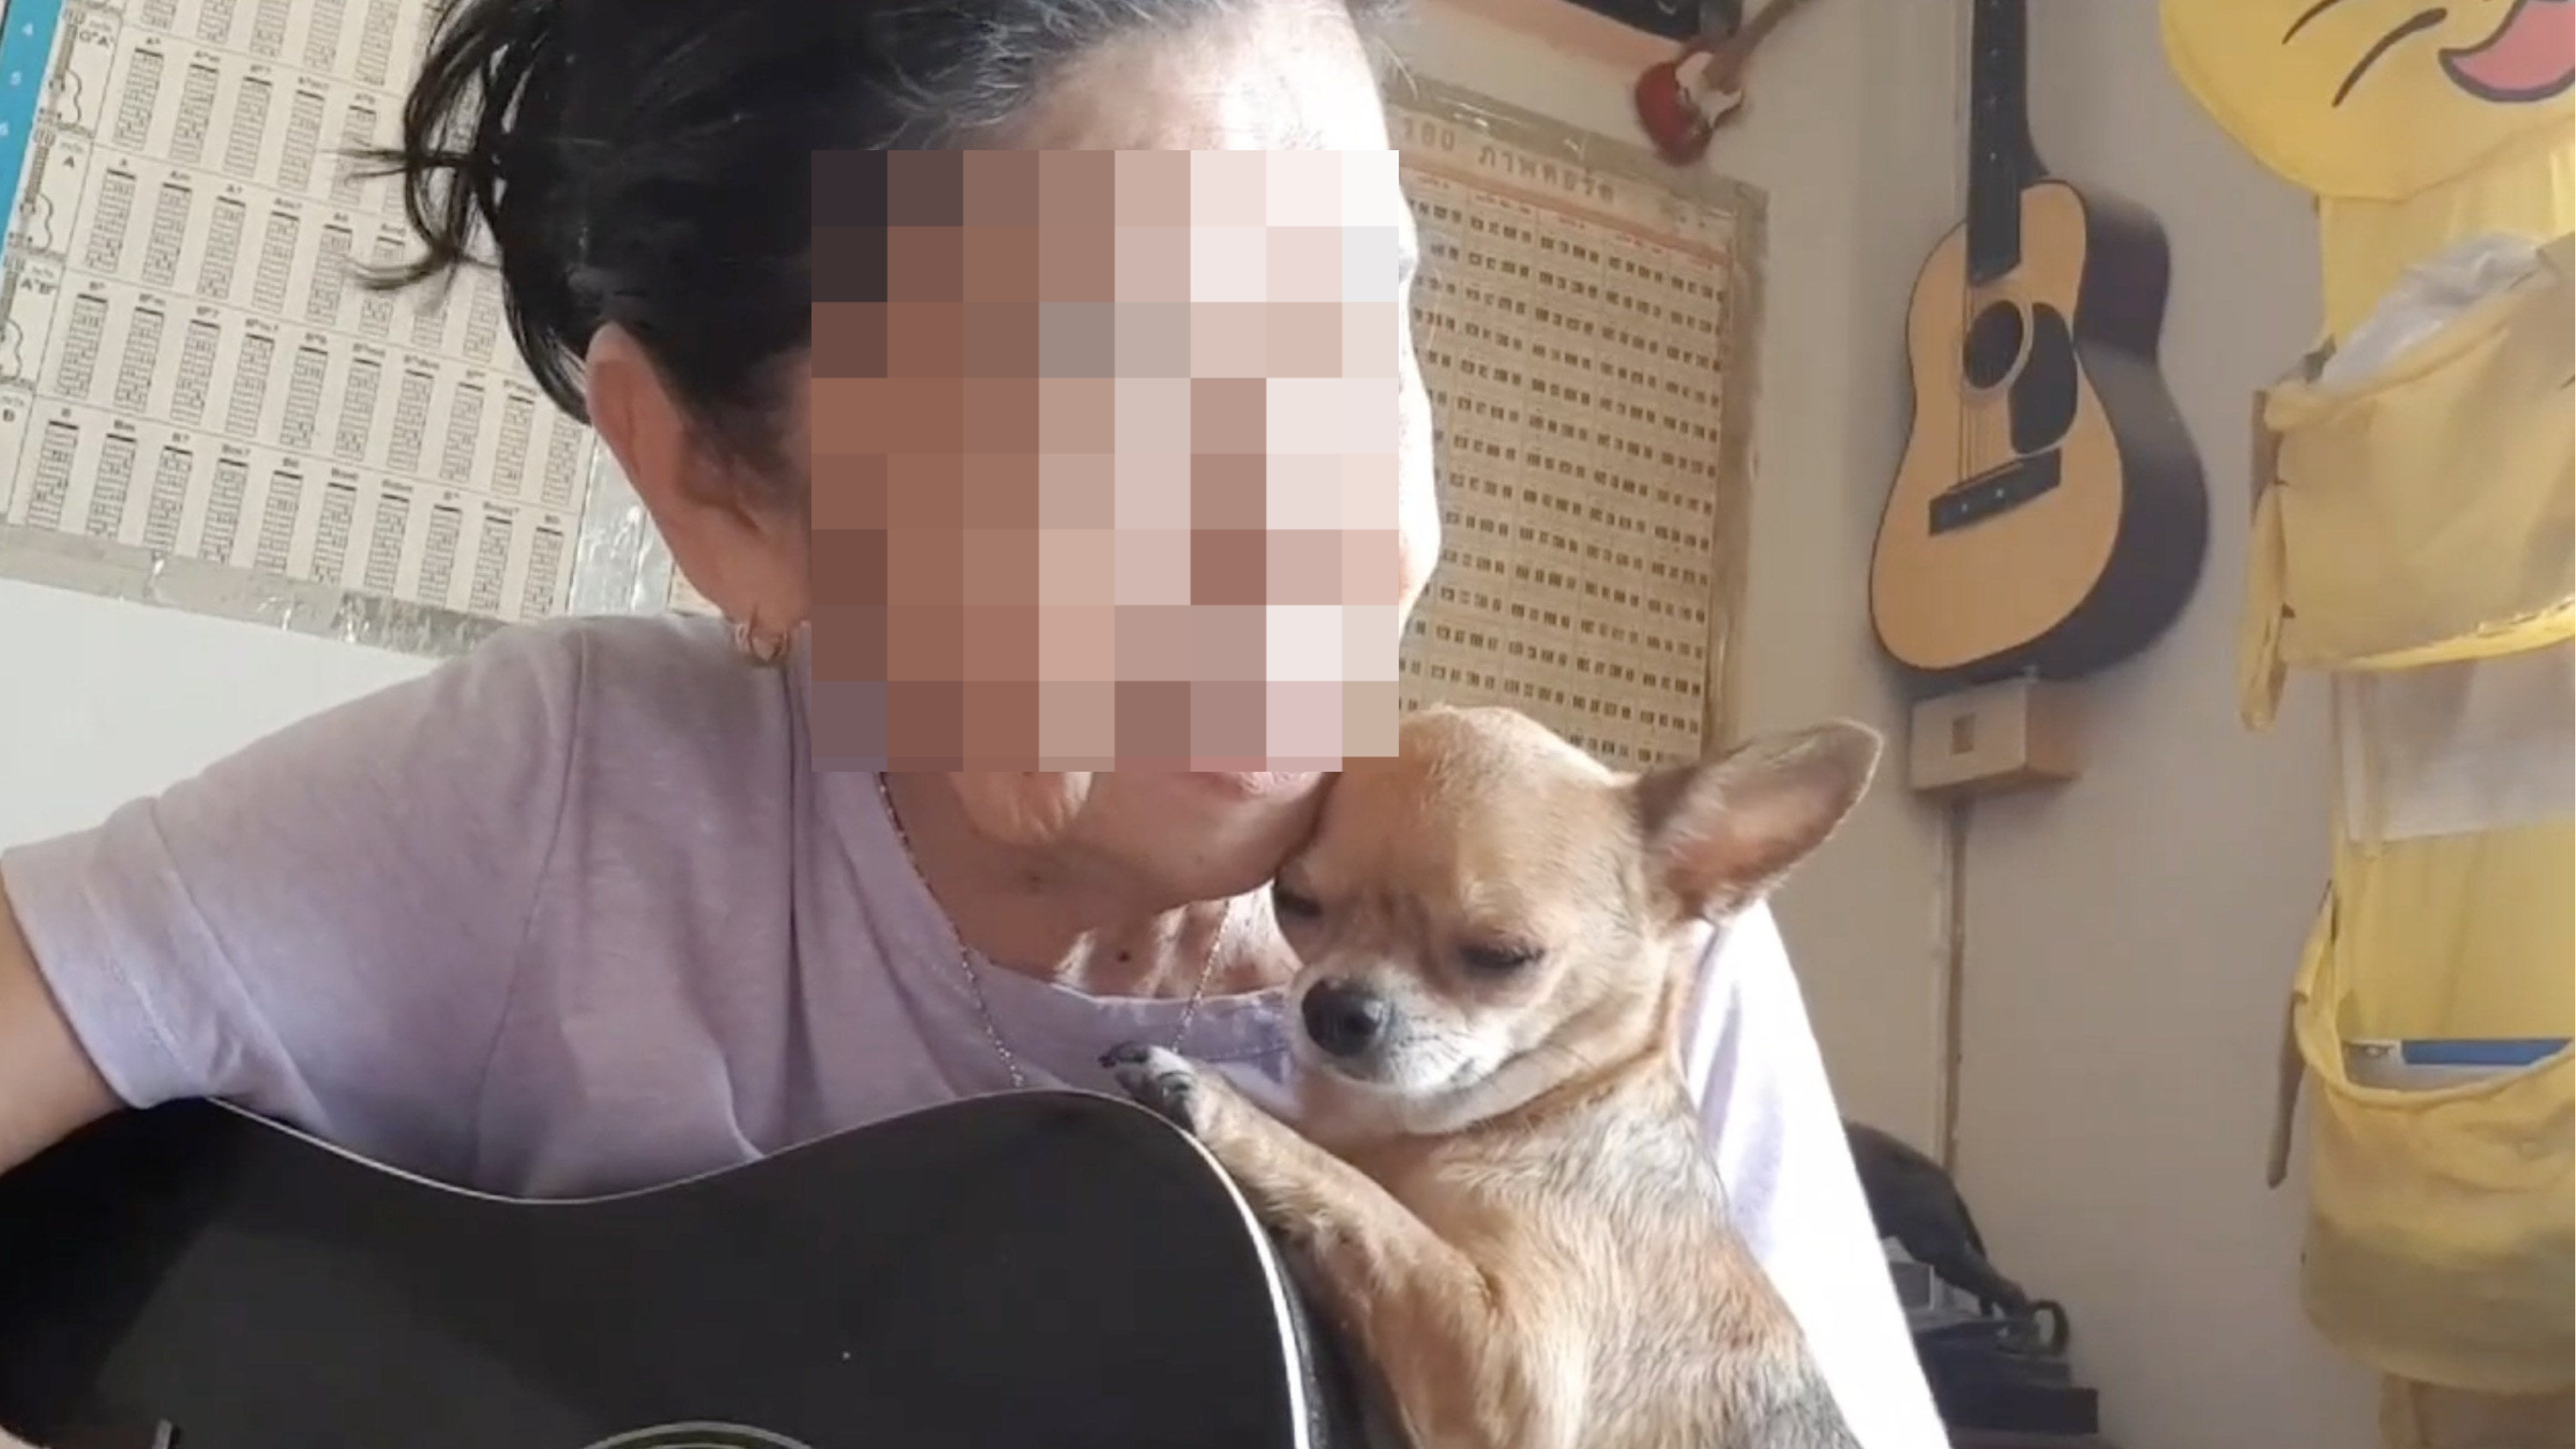 Grandma playing guitar with her chihuahua on her shoulder